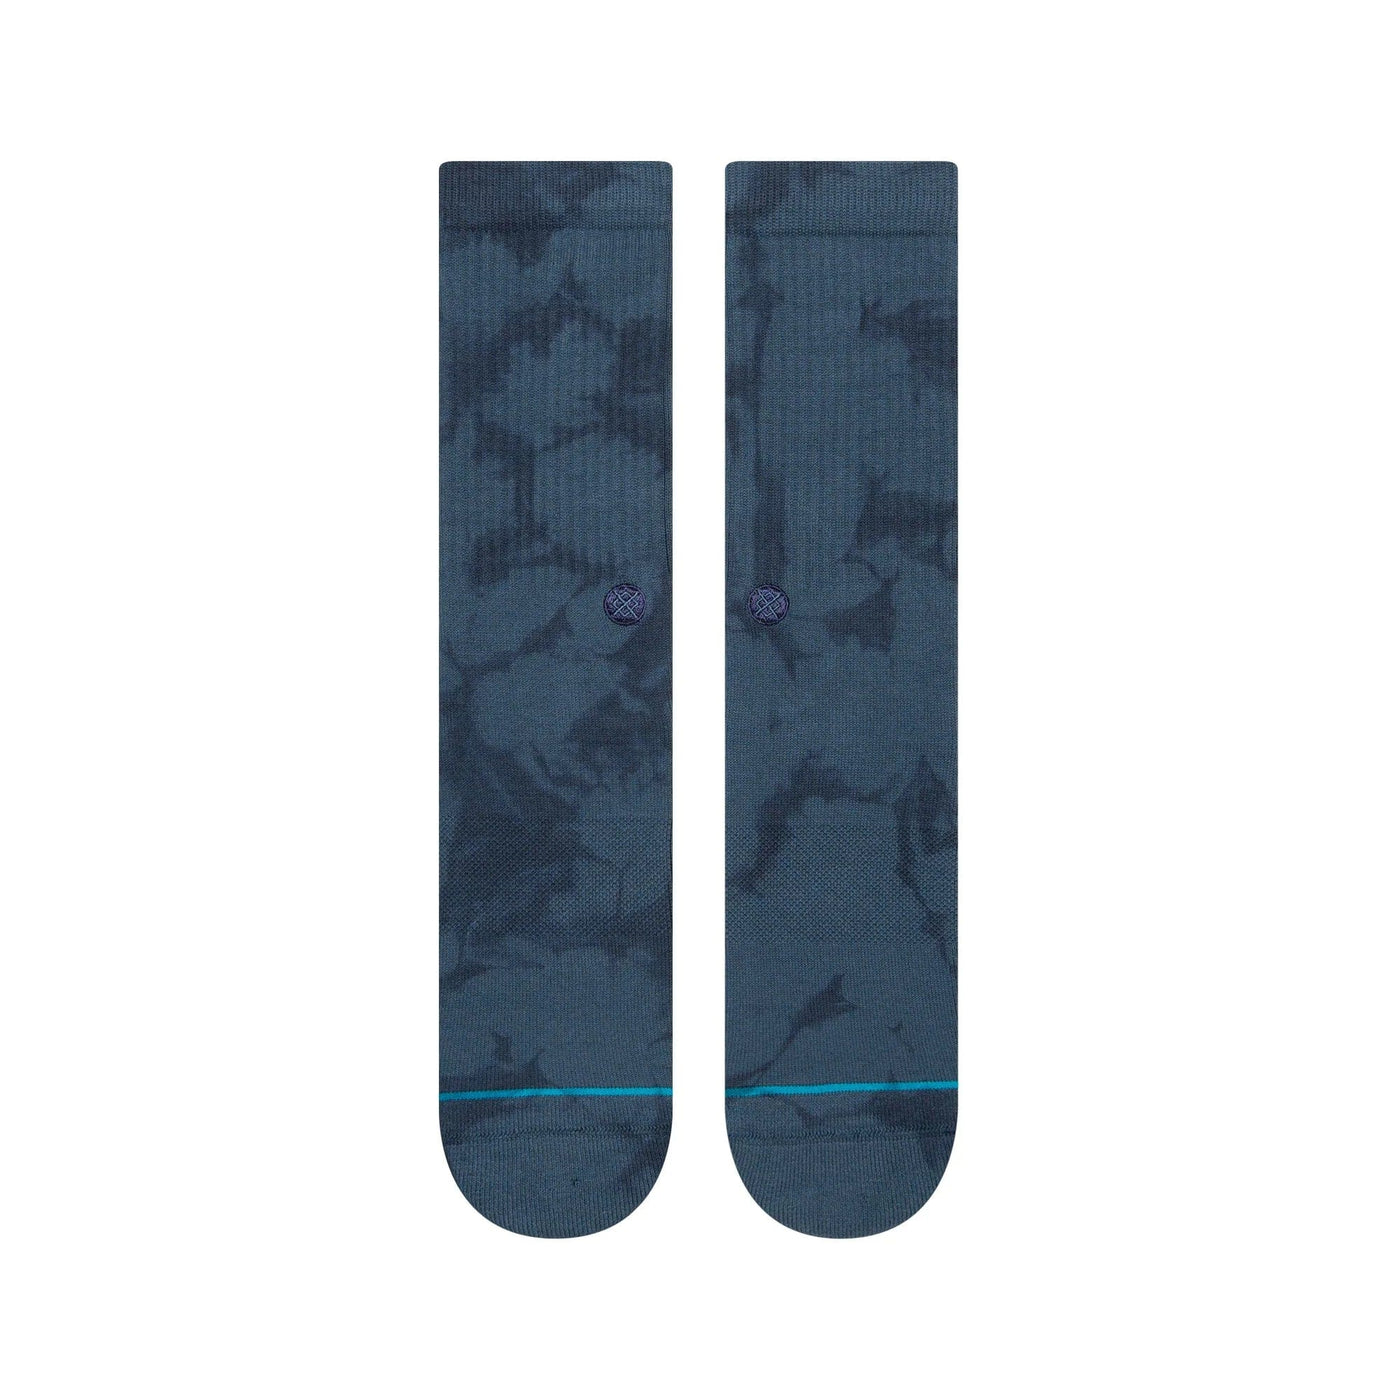 Stance Inflexion Crew Sock STANCE